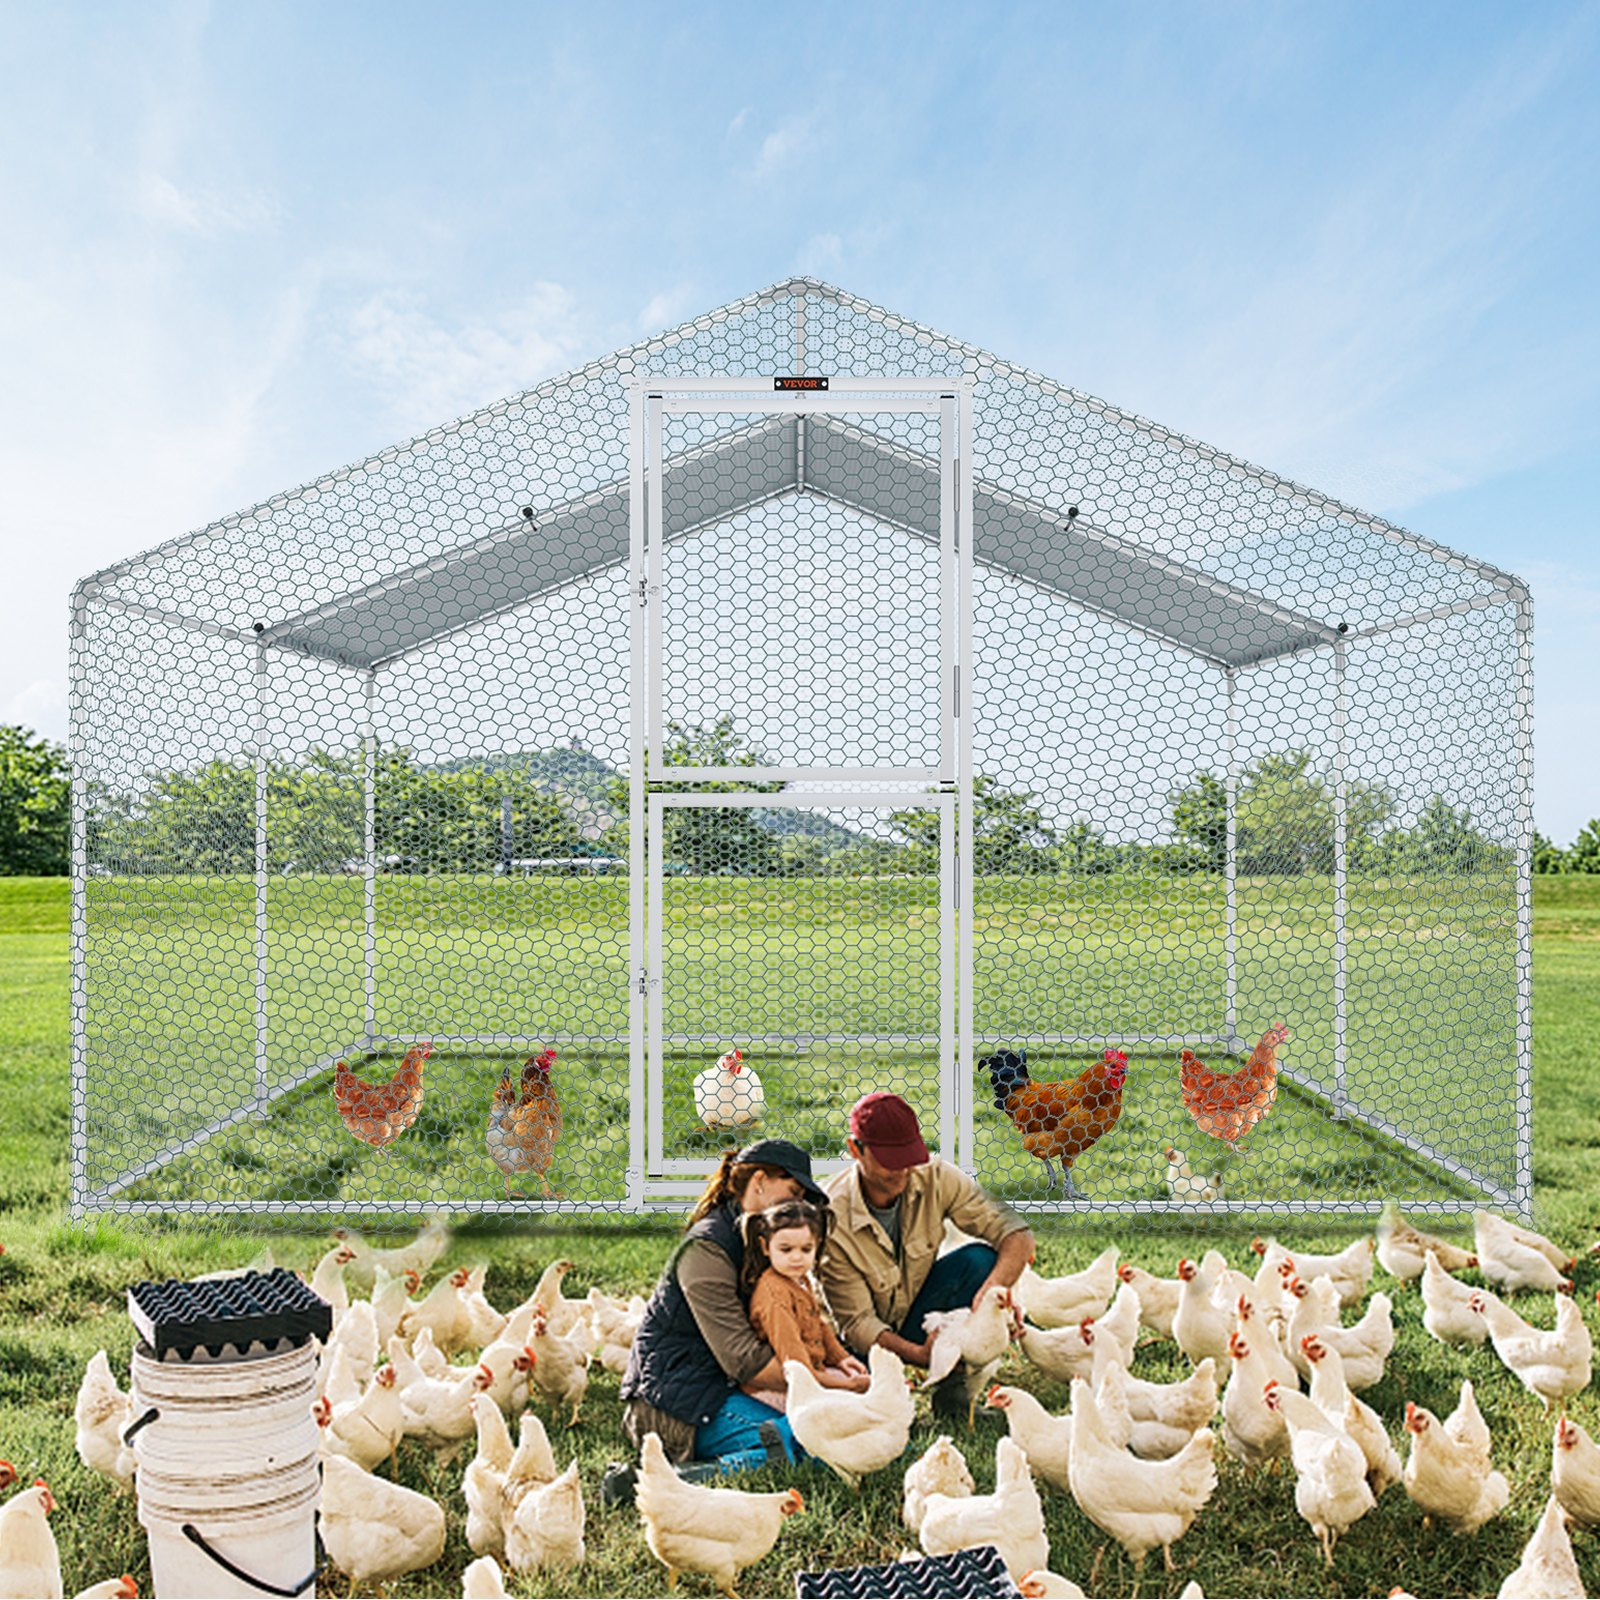 VEVOR Metal Chicken Coop, 13.1 x 9.8 x 6.6 ft Large Chicken Run, Peaked Roof Outdoor Walk-in Poultry Pen Cage for Farm or Backyard, with Water-proof Cover and Protection Mesh, for Hen, Duck, Rabbit, Goodies N Stuff